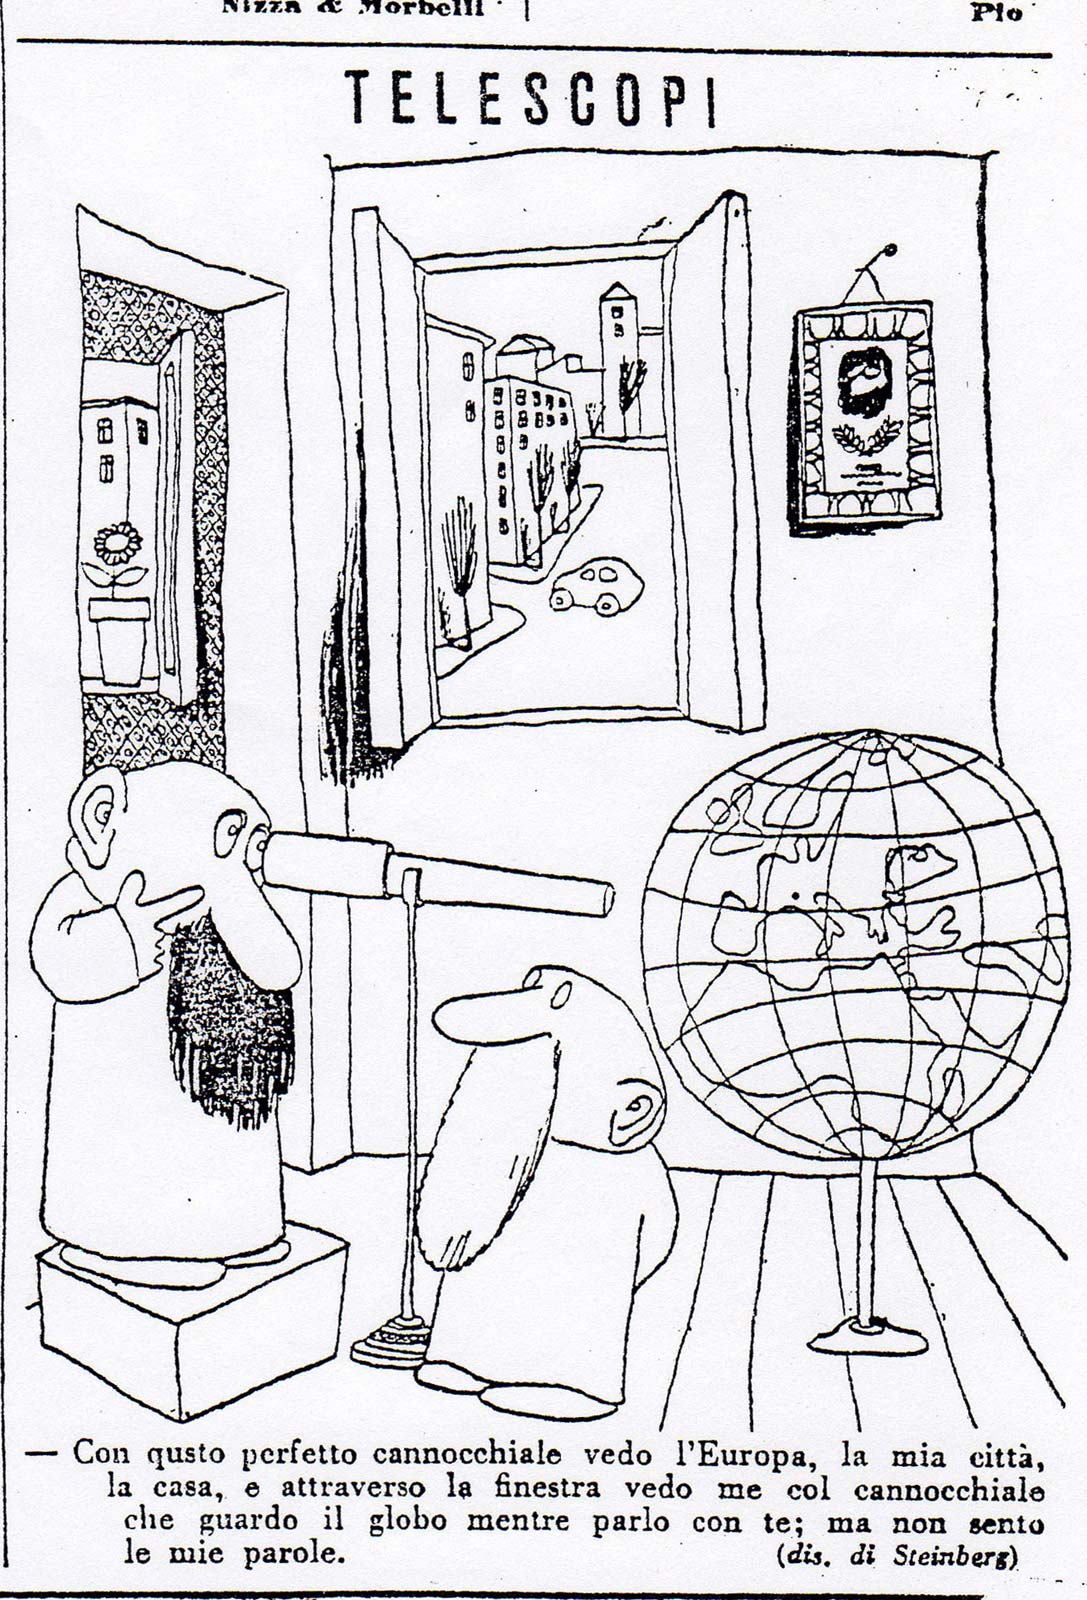 Cartoon published in <em>Settebello</em>, September 3, 1938. “With this perfect telescope, I see Europe, my city, my house, and through the window myself looking at the world through the telescope while speaking with you; but I don’t hear what I’m saying.”